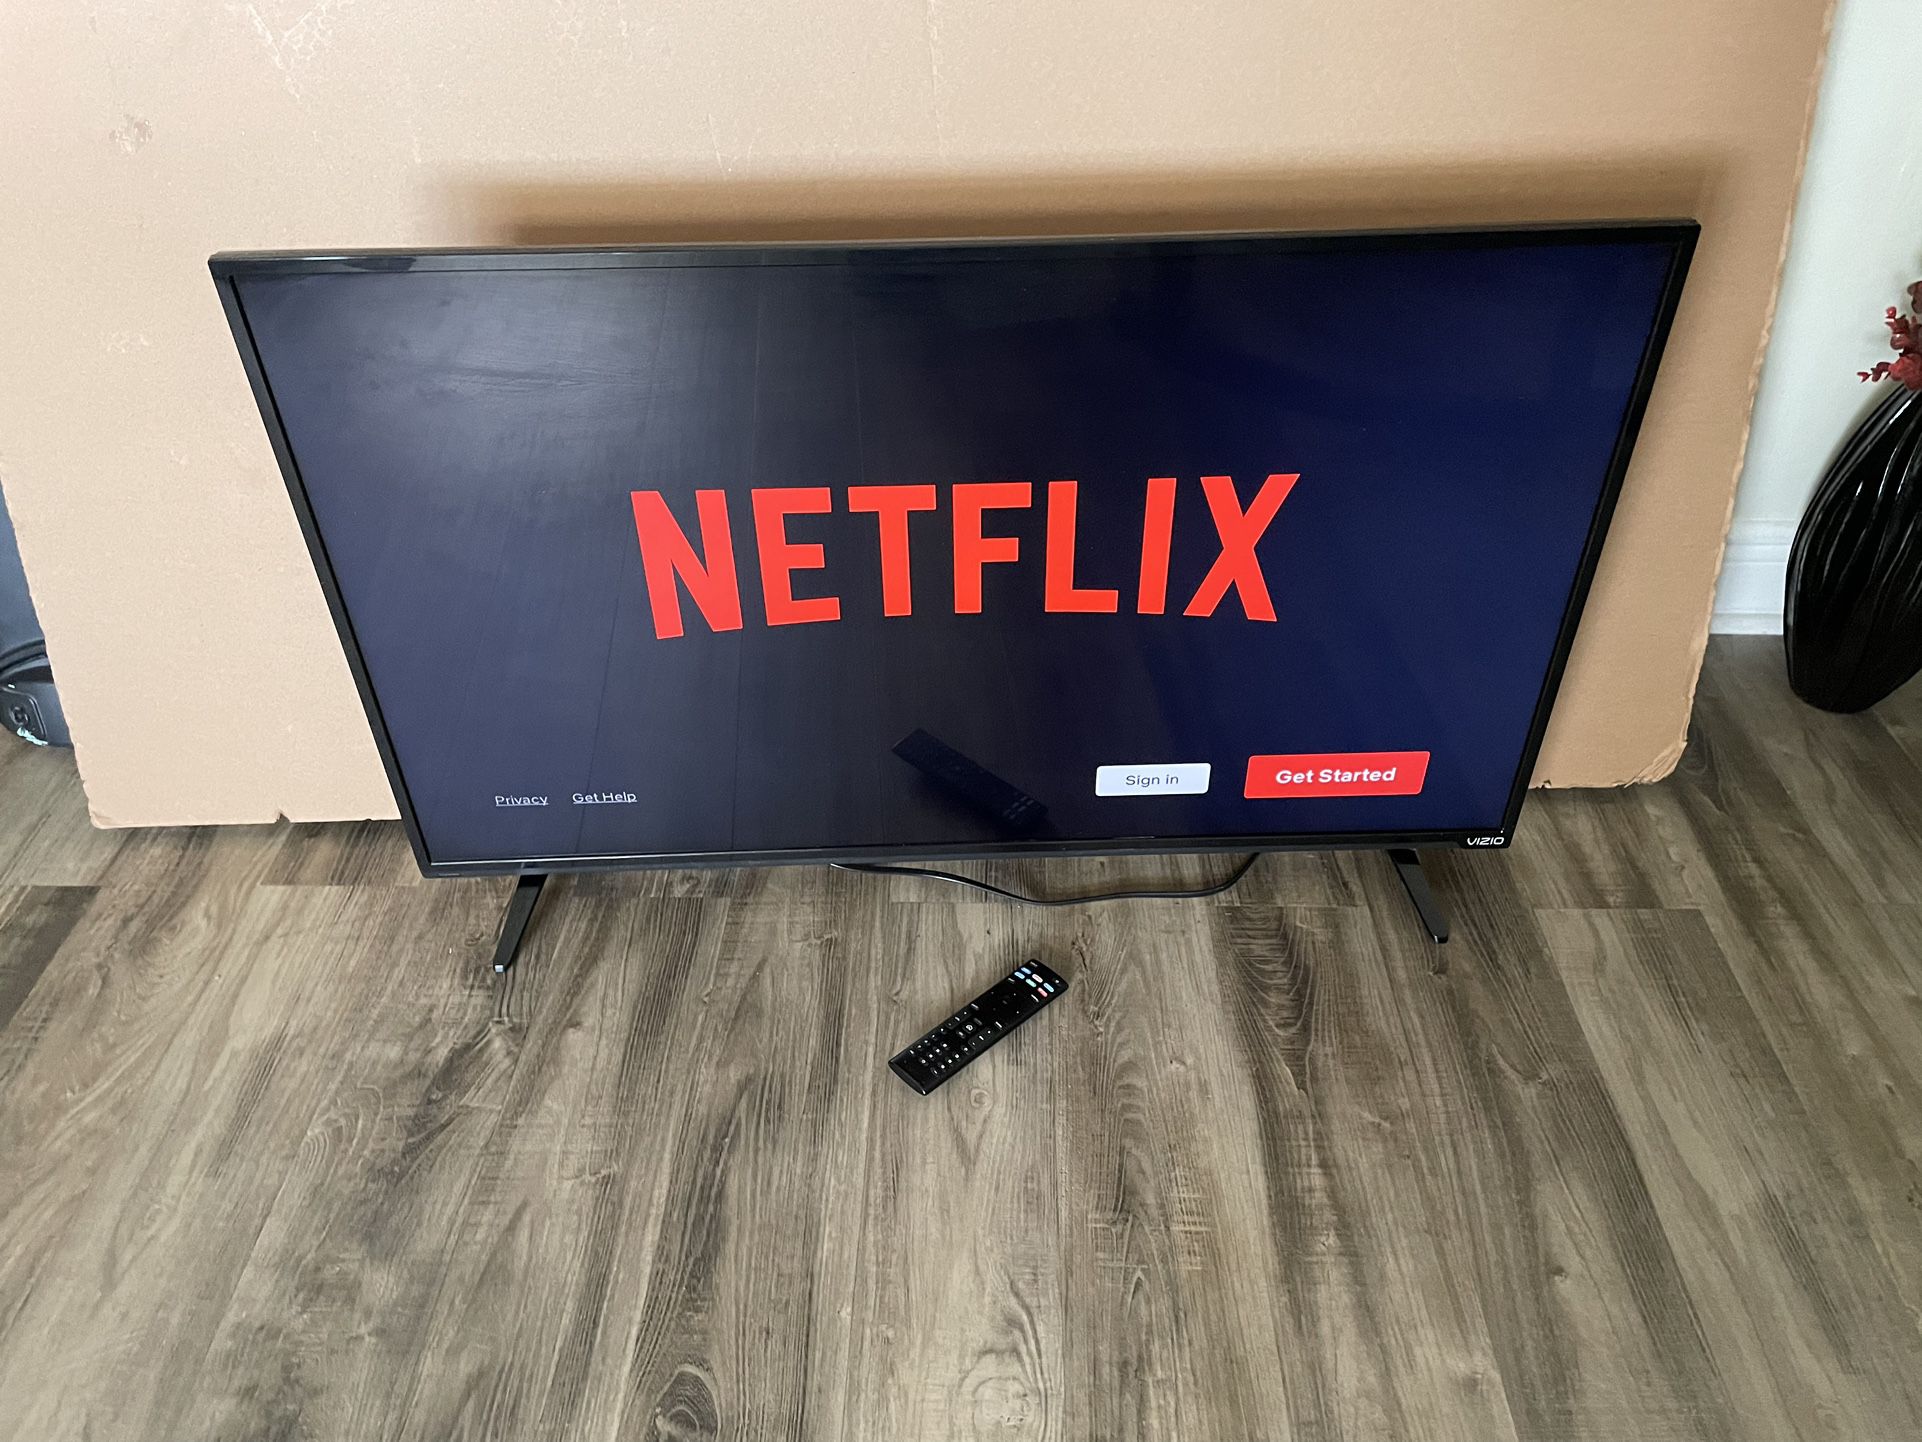 Vizio 43” Smart TV With Remote Control In Working Condition $120 Firm On Price